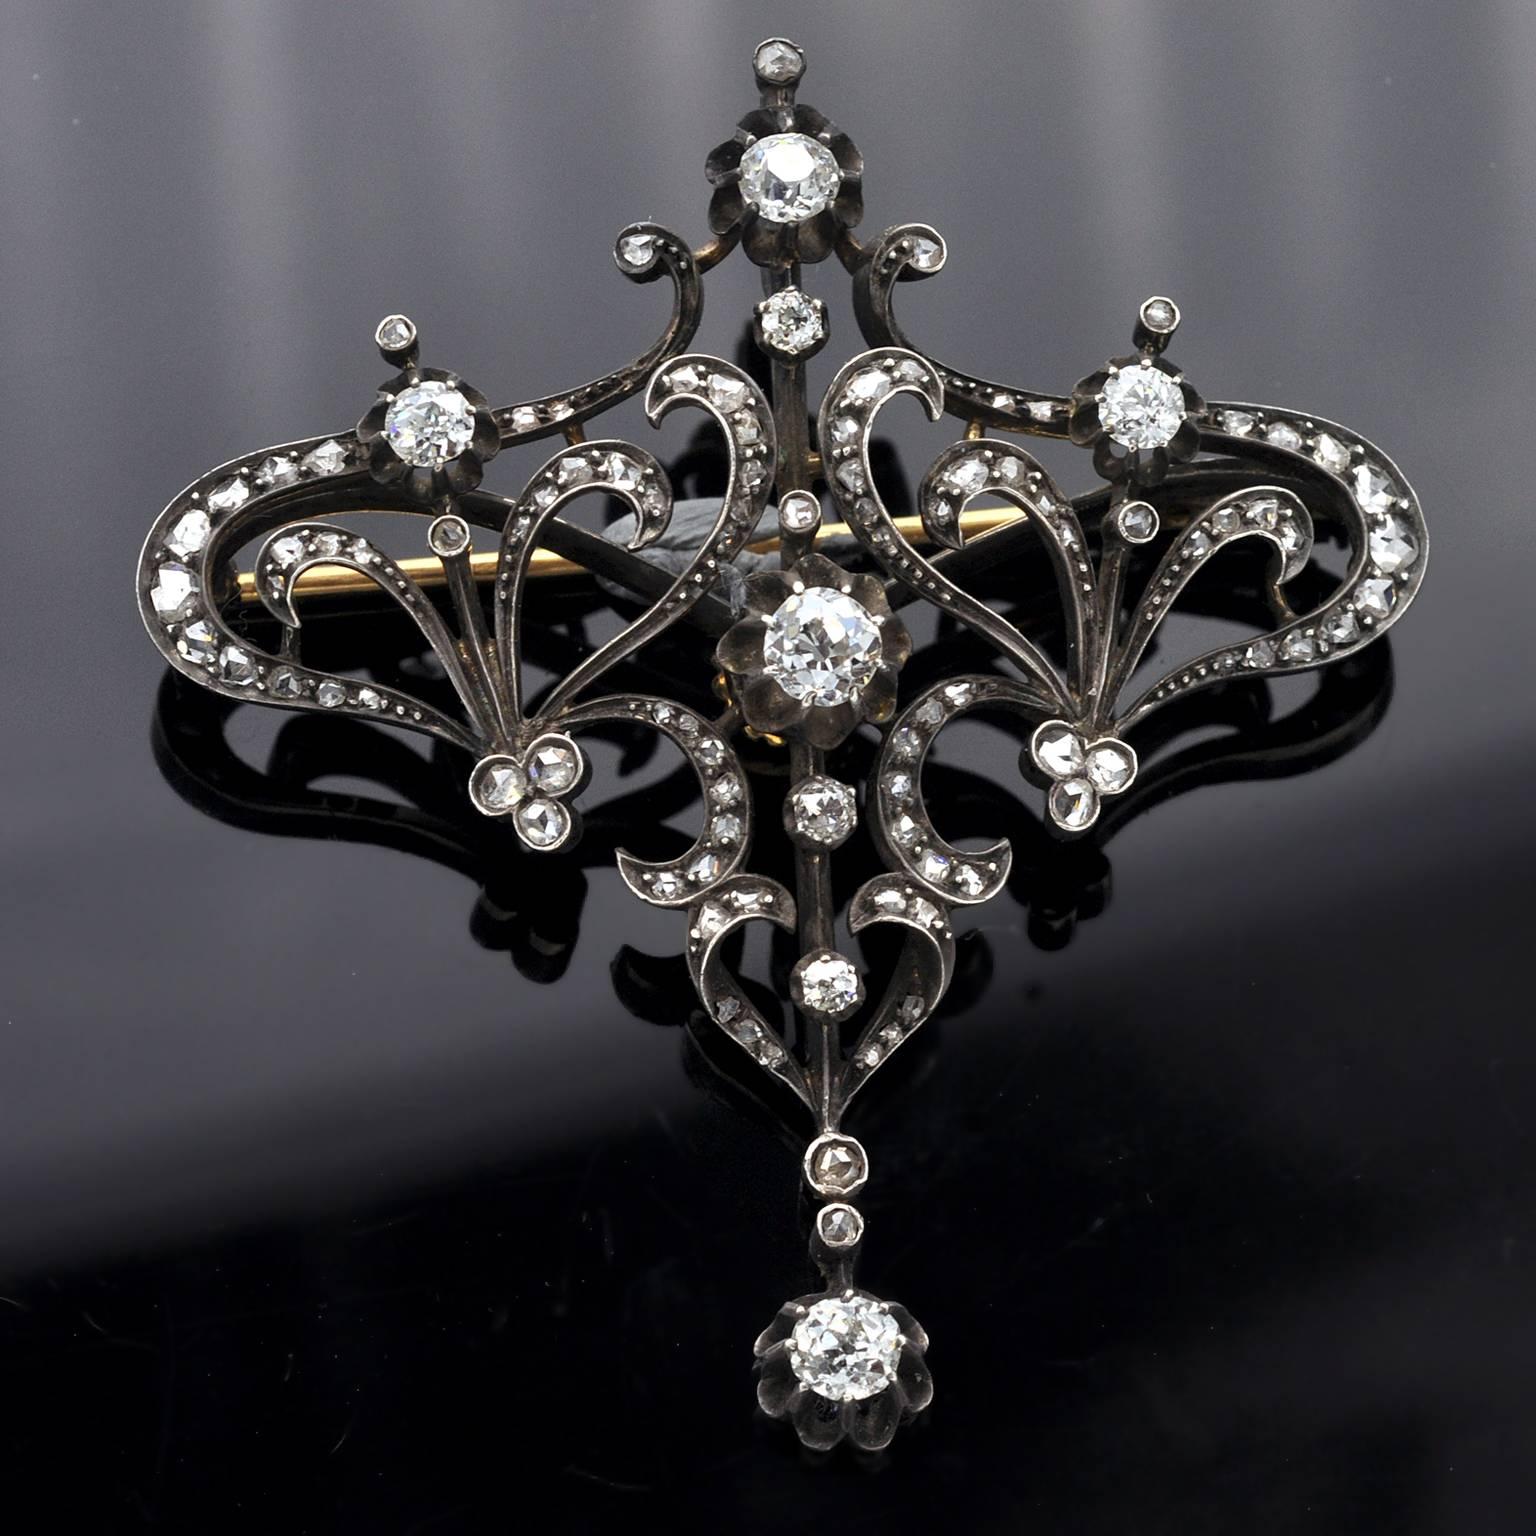 Exquisite Piece of jewelry which can be worn as a brooch or as a pendant necklace. The pin can be removed thanks to a screw  allowing it to lay comfortably flat wile used as a pendant. 
It is made of silver on 18kt gold set with old-european cut and